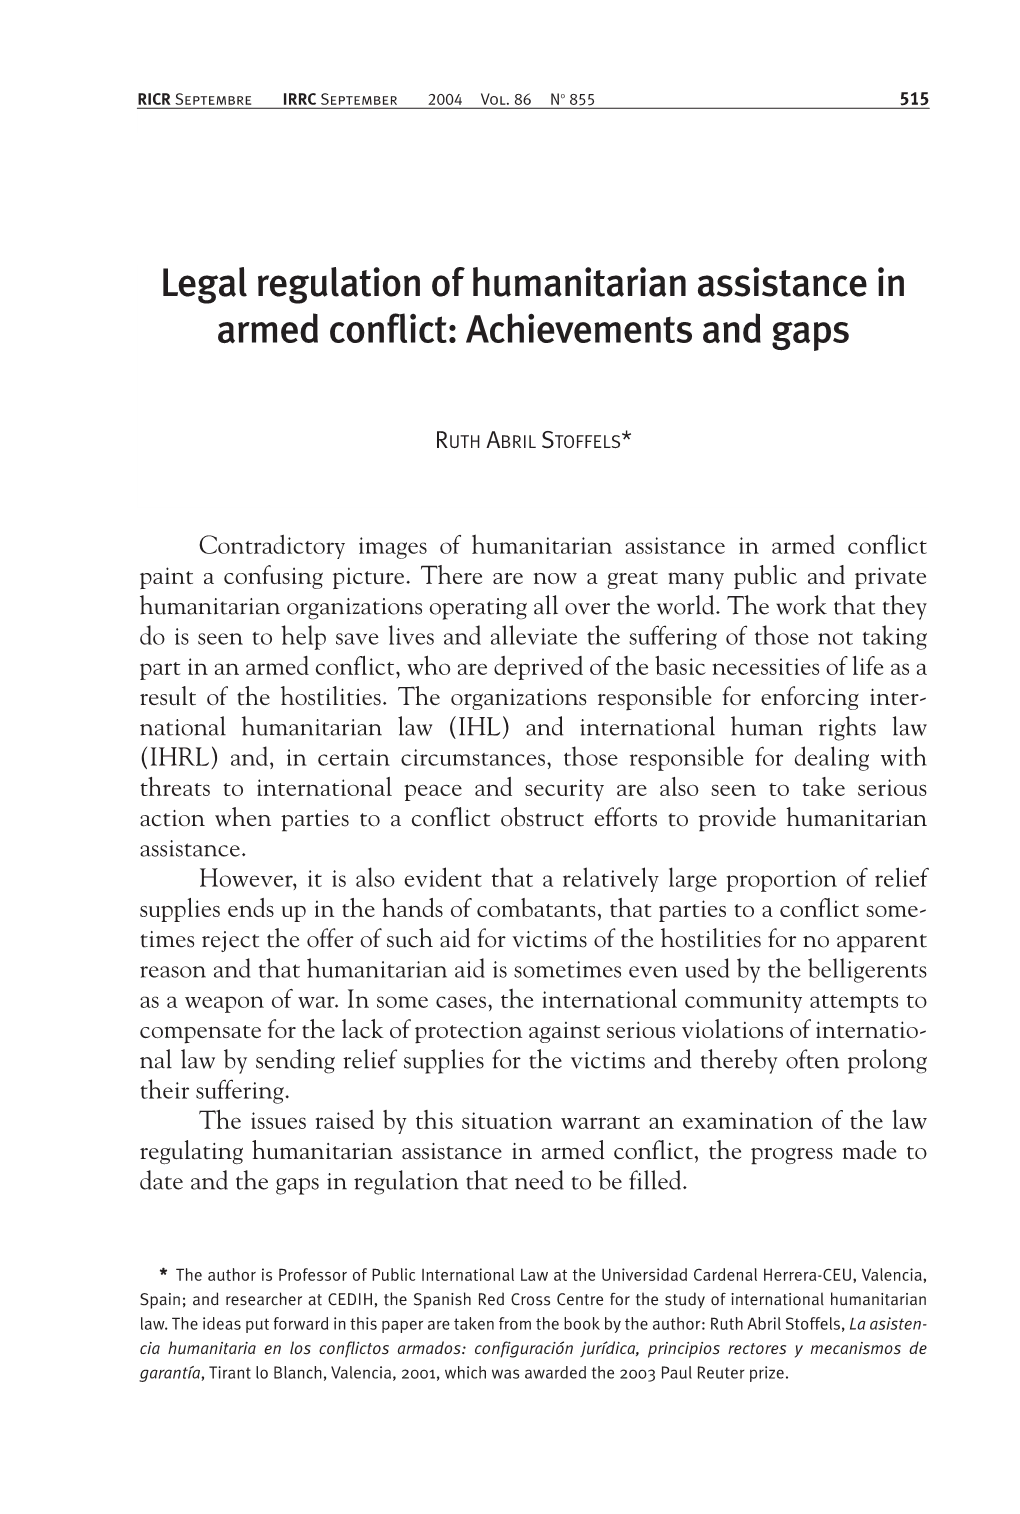 Humanitarian Assistance in Armed Conflict: Achievements and Gaps